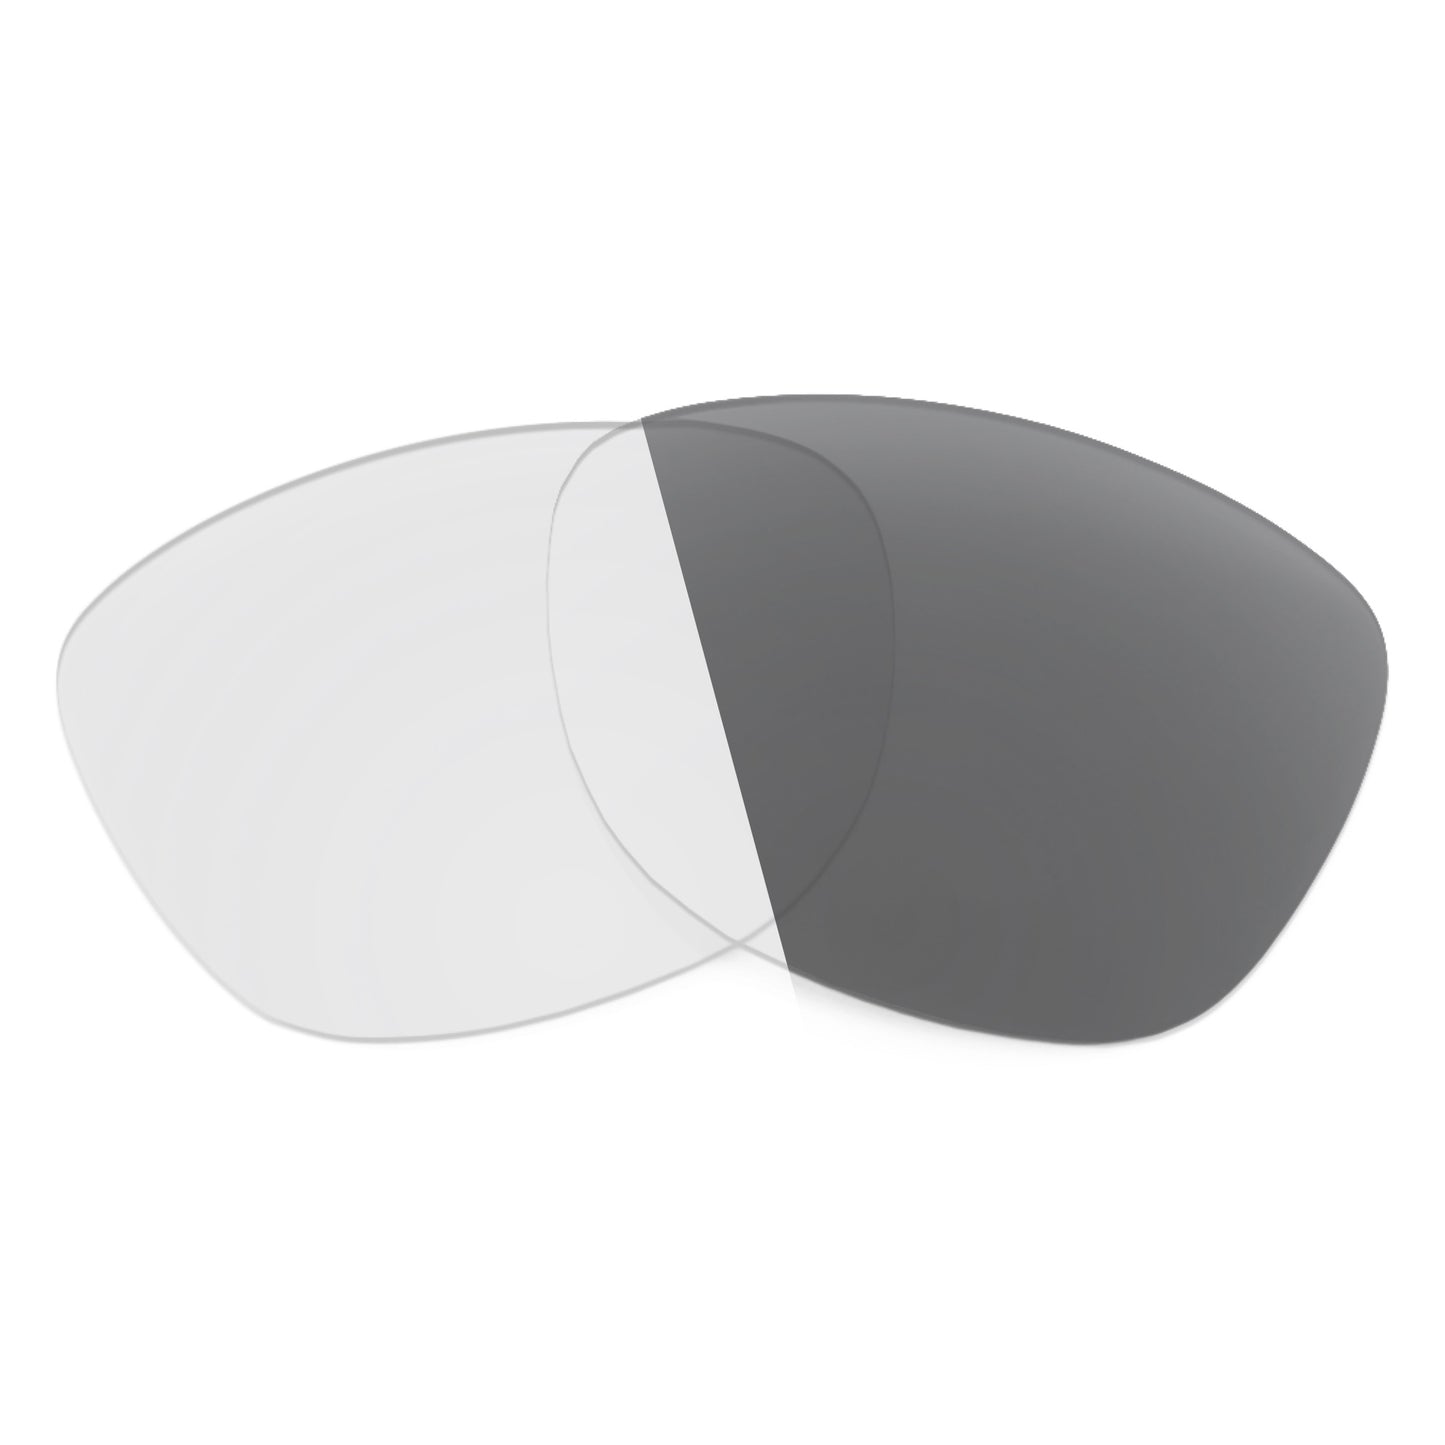 Revant replacement lenses for Ray-Ban RB4232 57mm Non-Polarized Adapt Gray Photochromic